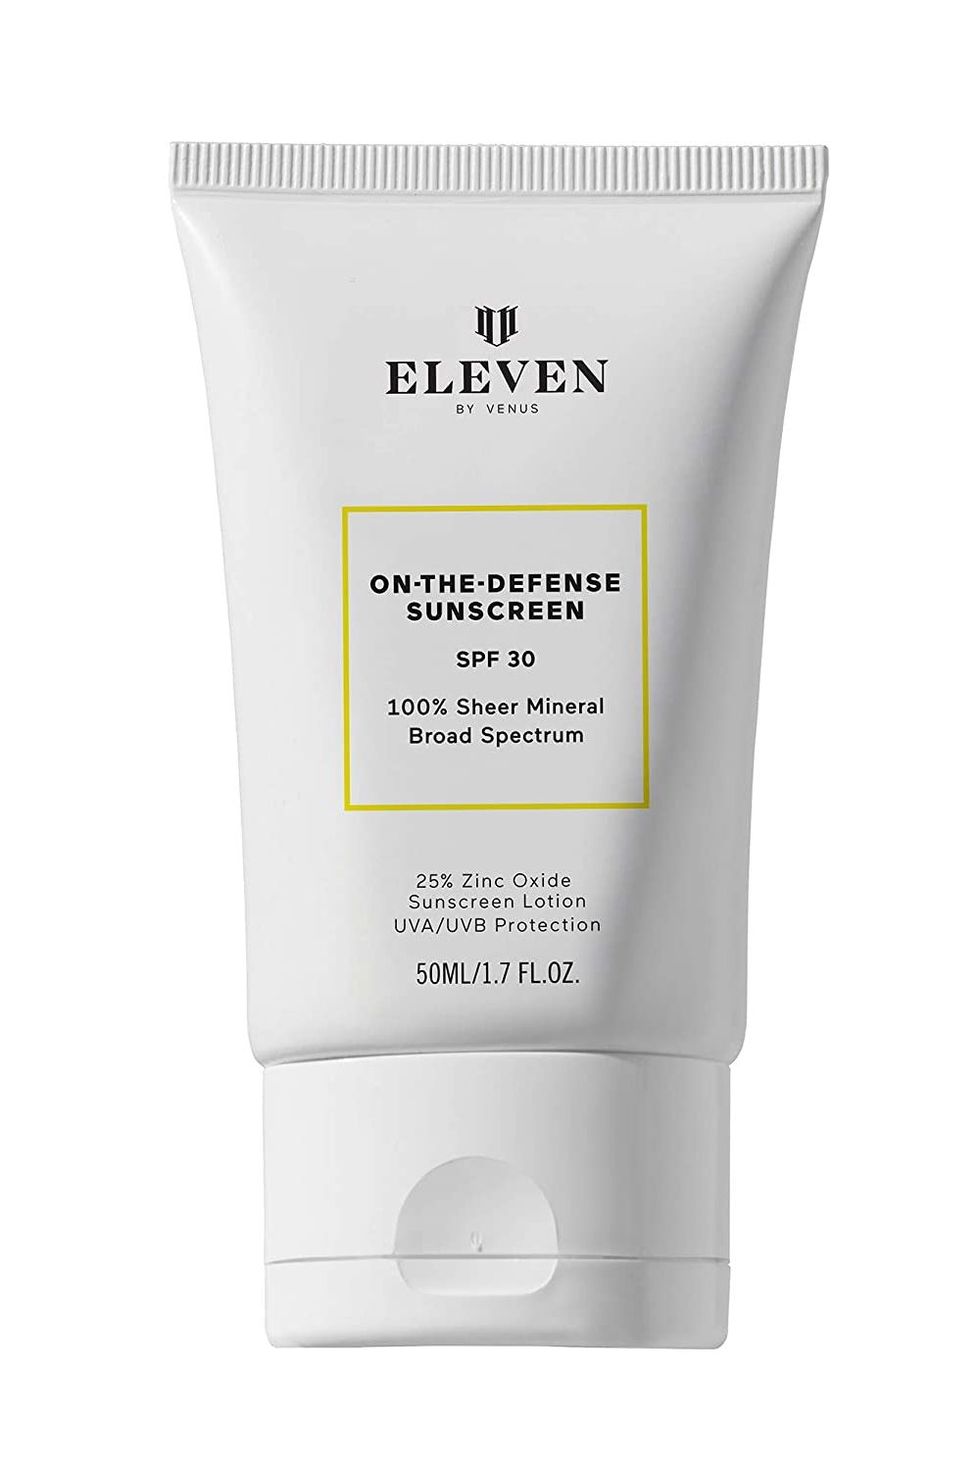 EleVen by Venus On-The-Defense Natural Sunscreen SPF 30